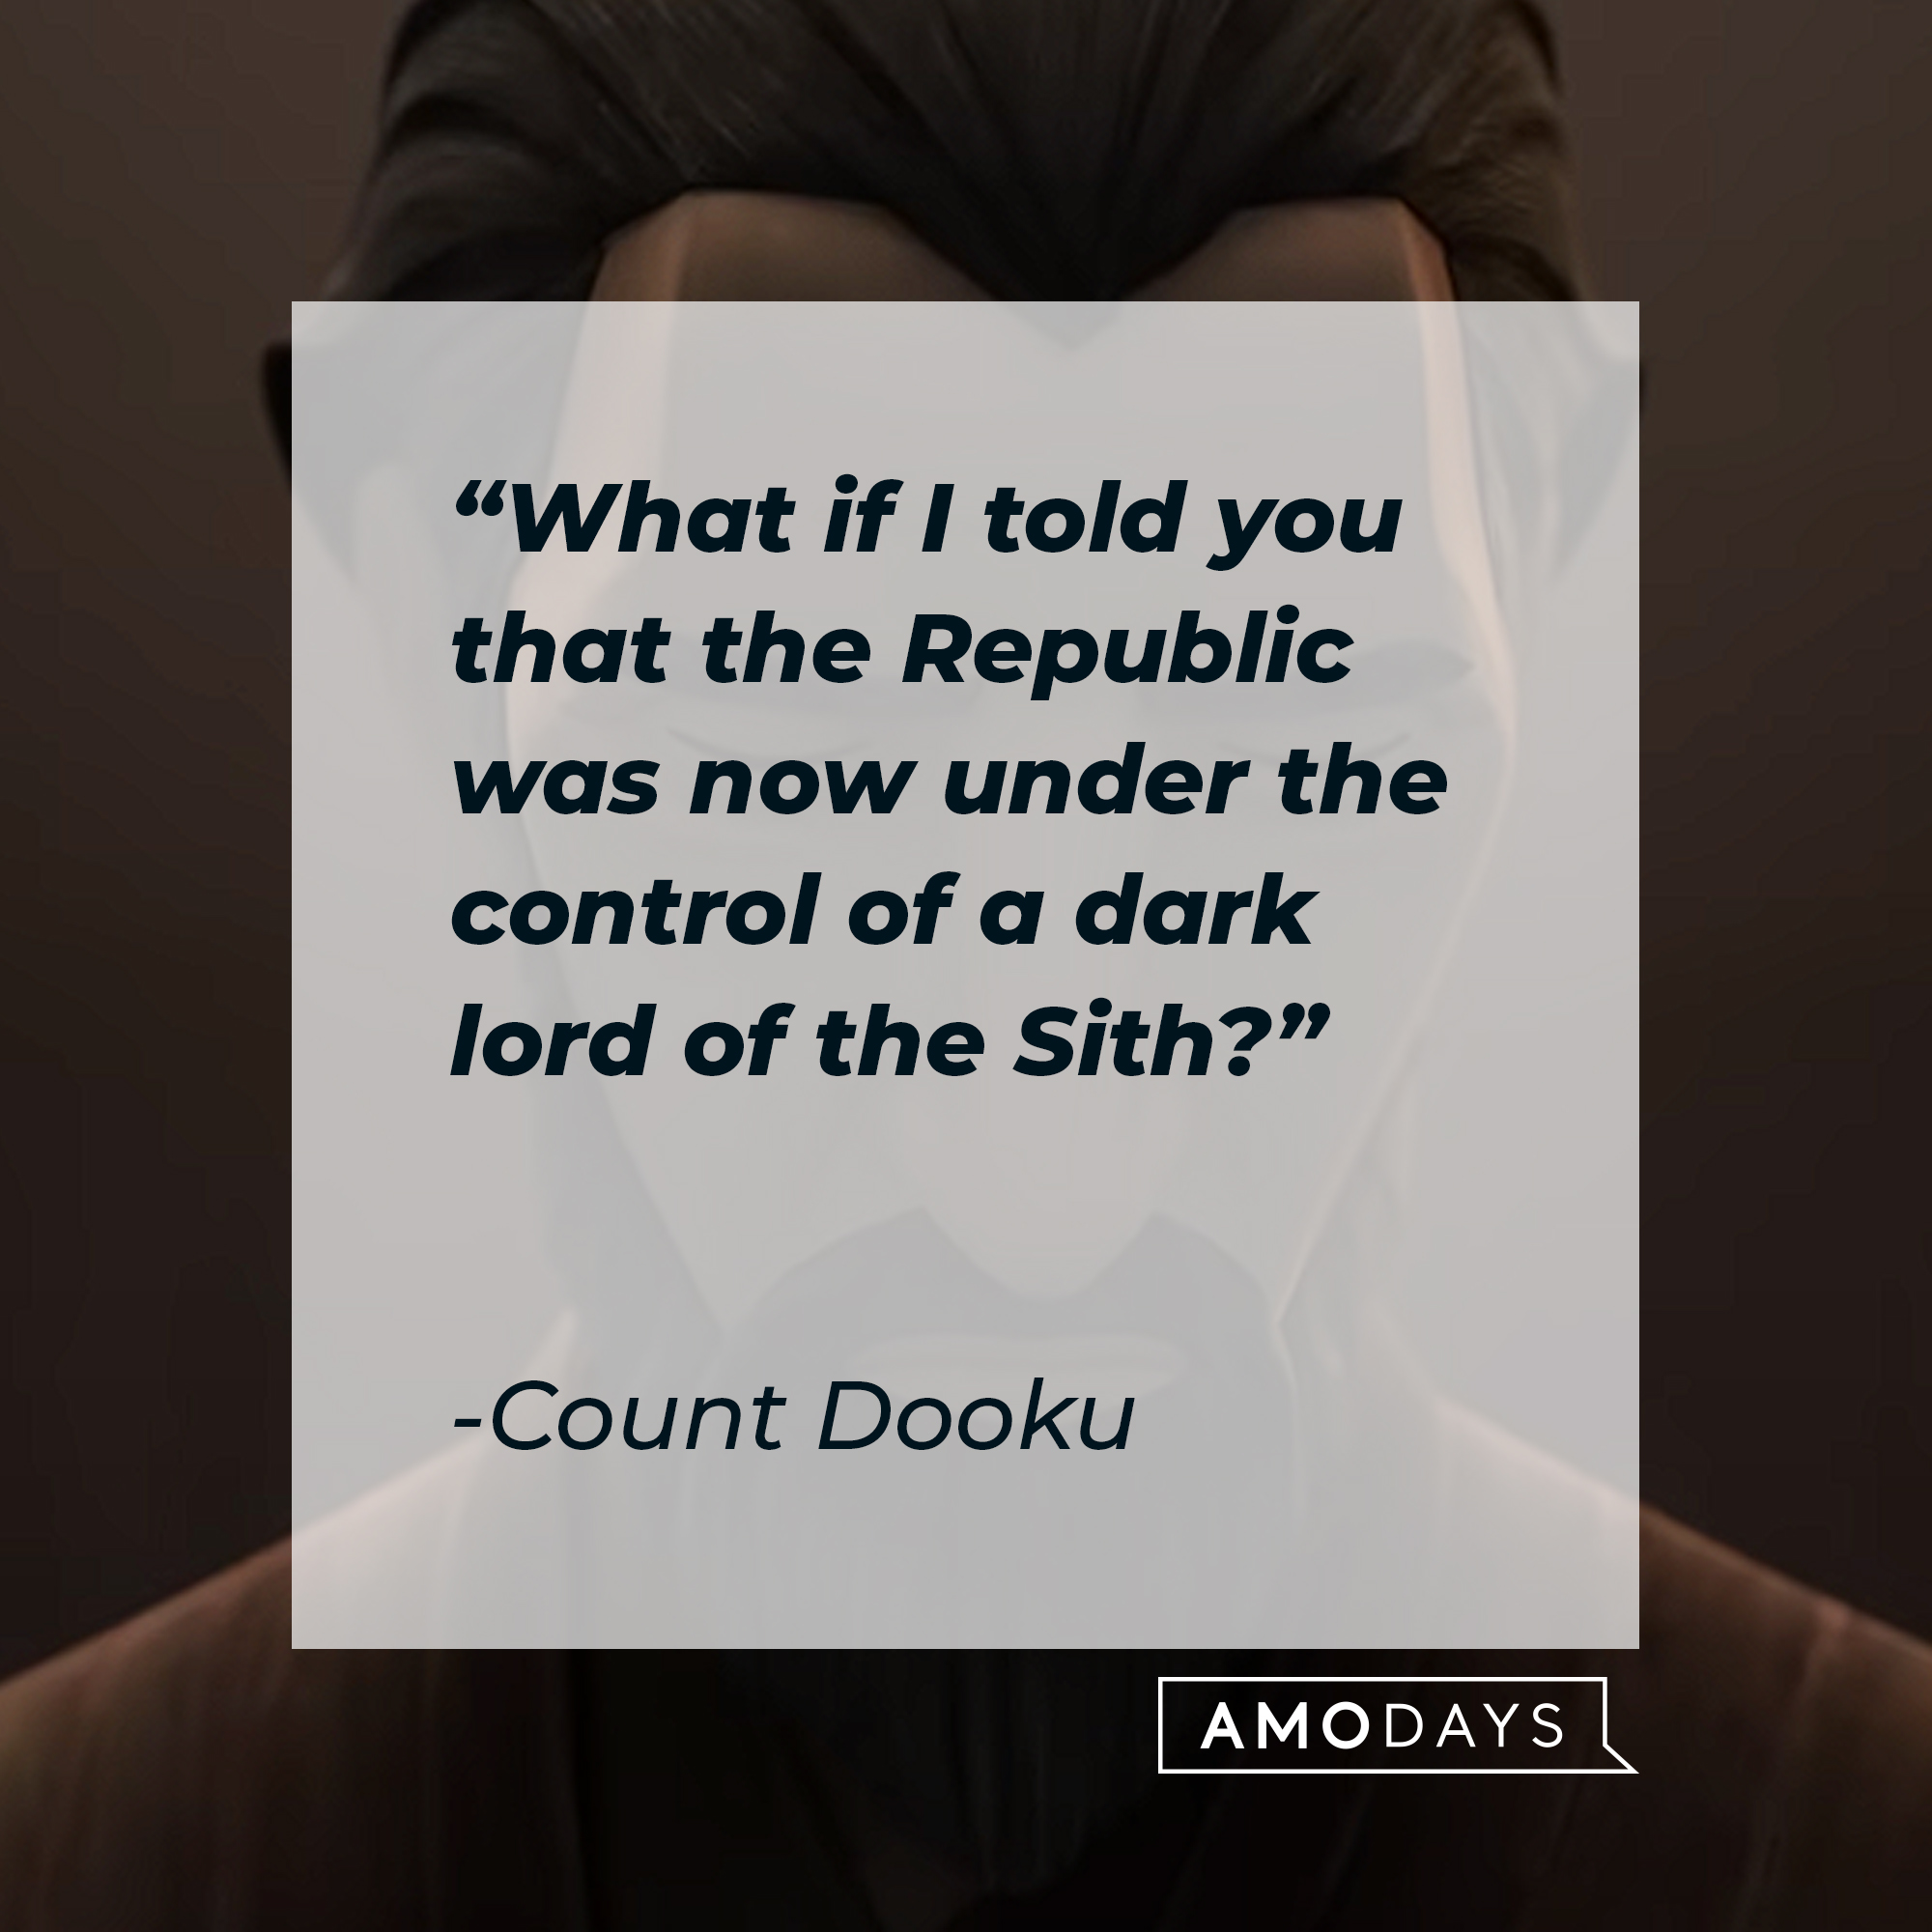 Count Dooku's quote: "What if I told you that the Republic was now under the control of a dark lord of the Sith?" | Source: youtube.com/StarWars